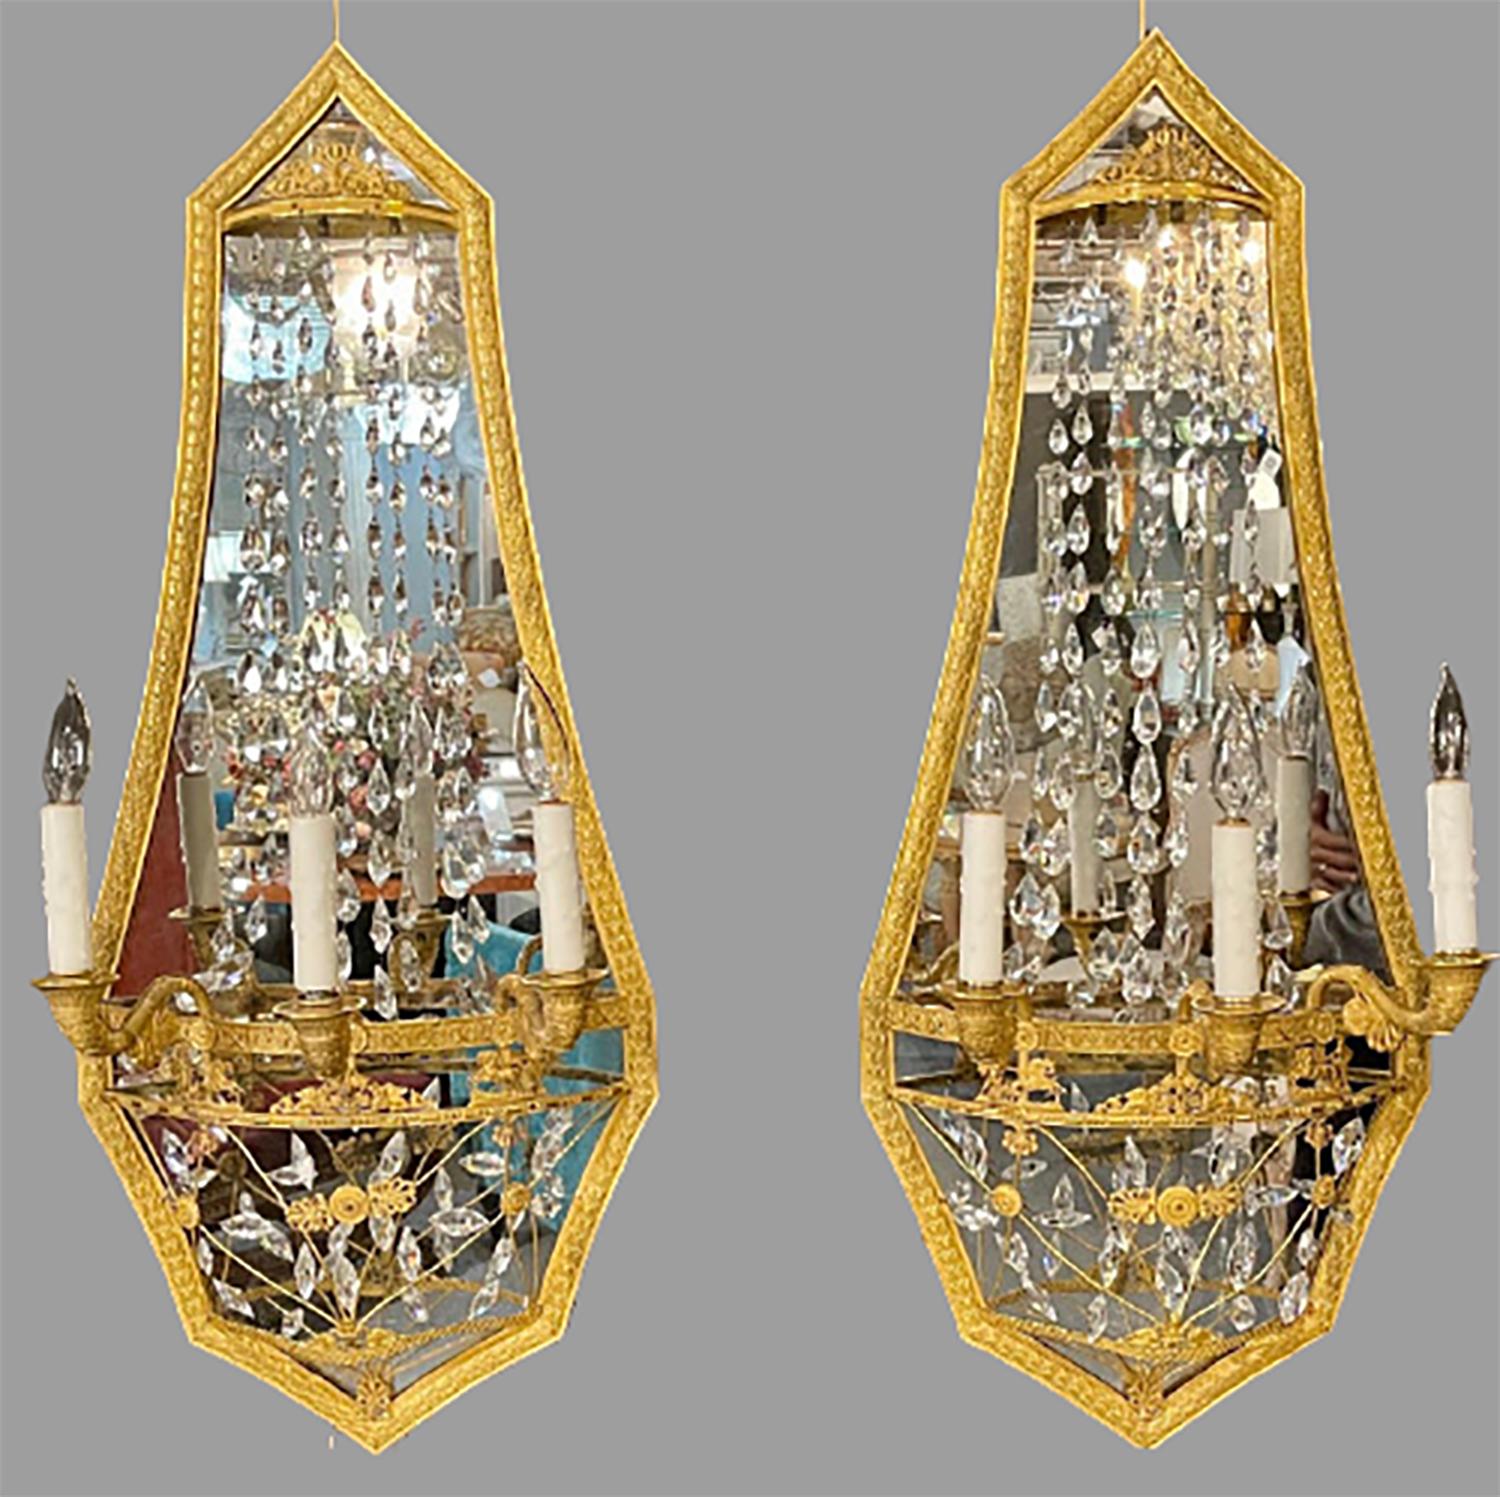 Pair of Maison Baguès mirrored wall lights, sconces. This stunning pair of large and very impressive wall sconces in a dore bronze finish having a Russian neoclassical flair are certain to make a statement in any area of the home. These rare and